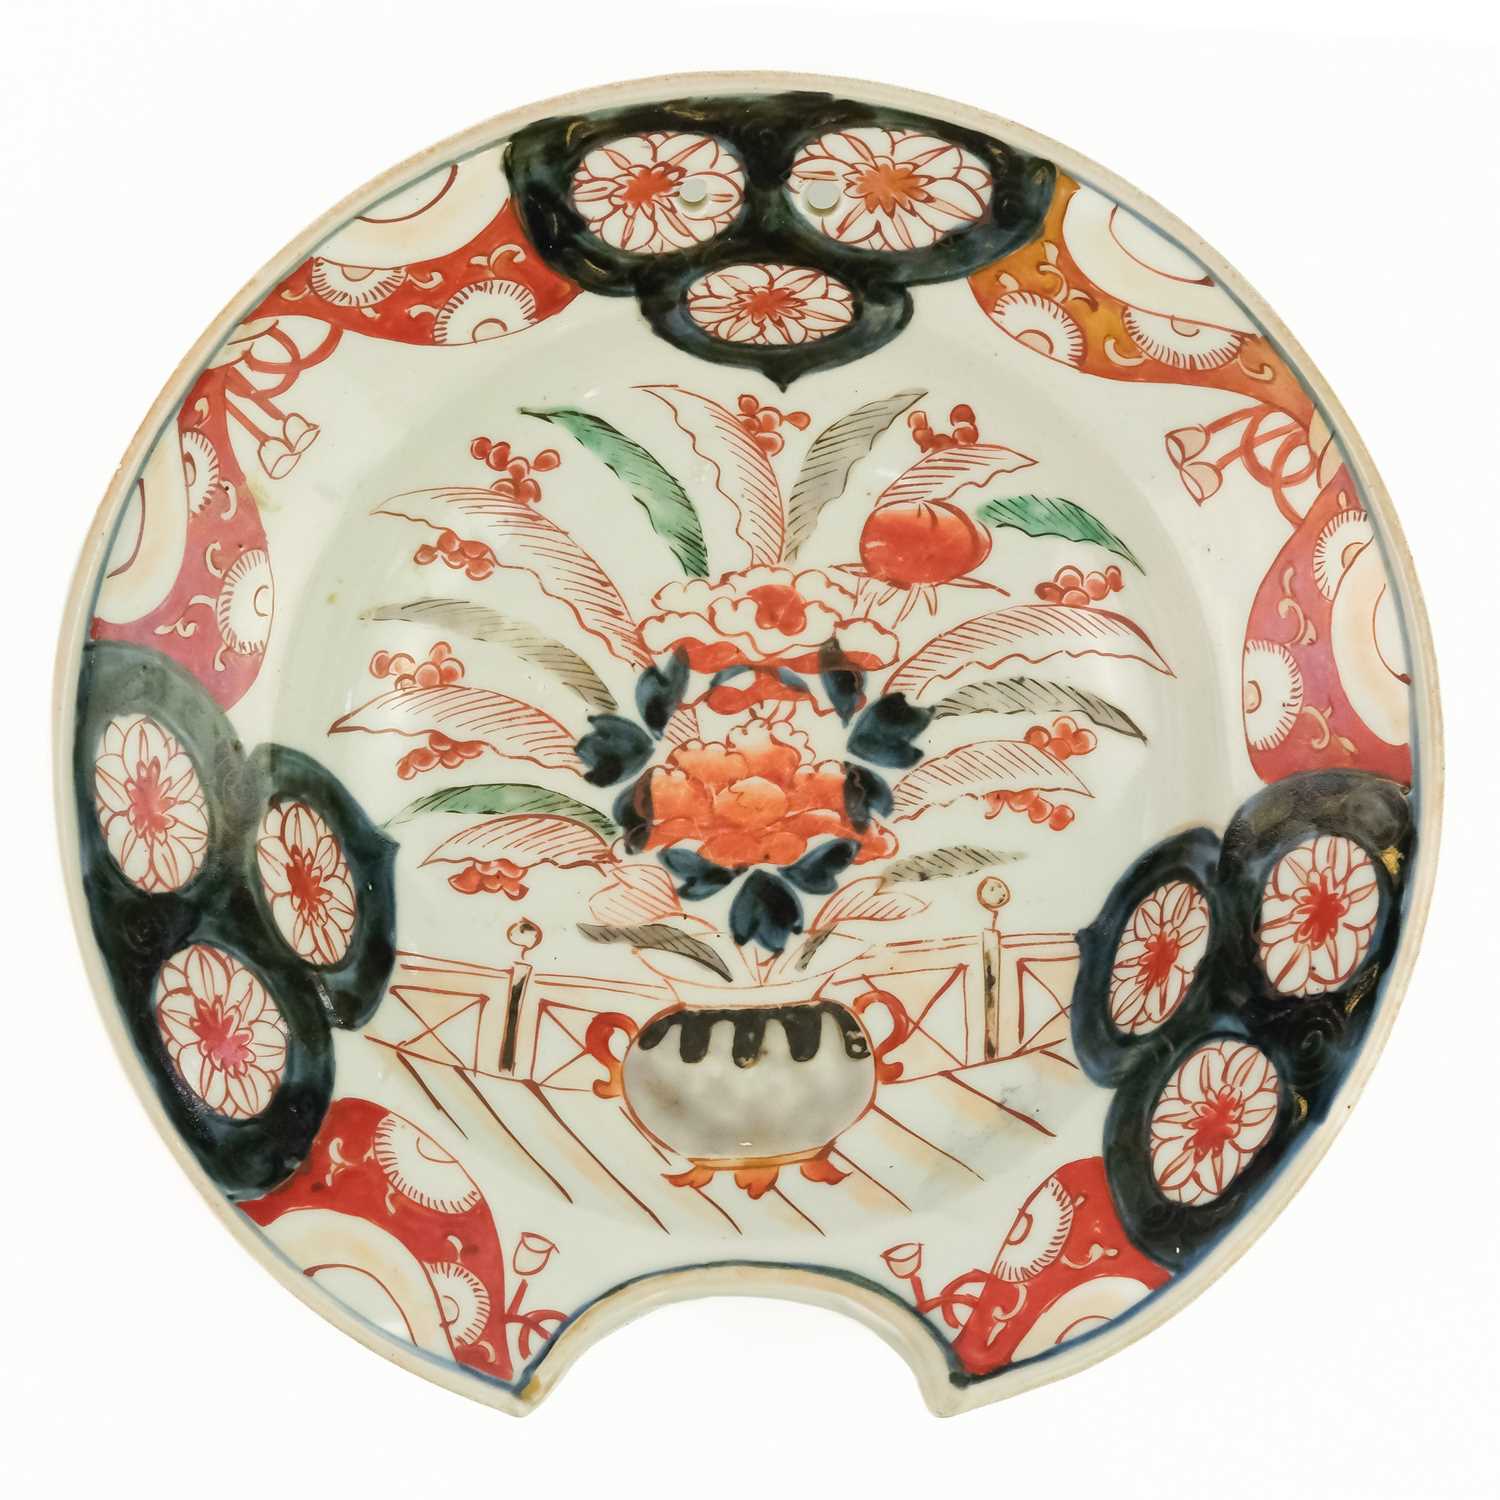 A Japanese Imari porcelain barbers bowl, late 19th/early 20th century.